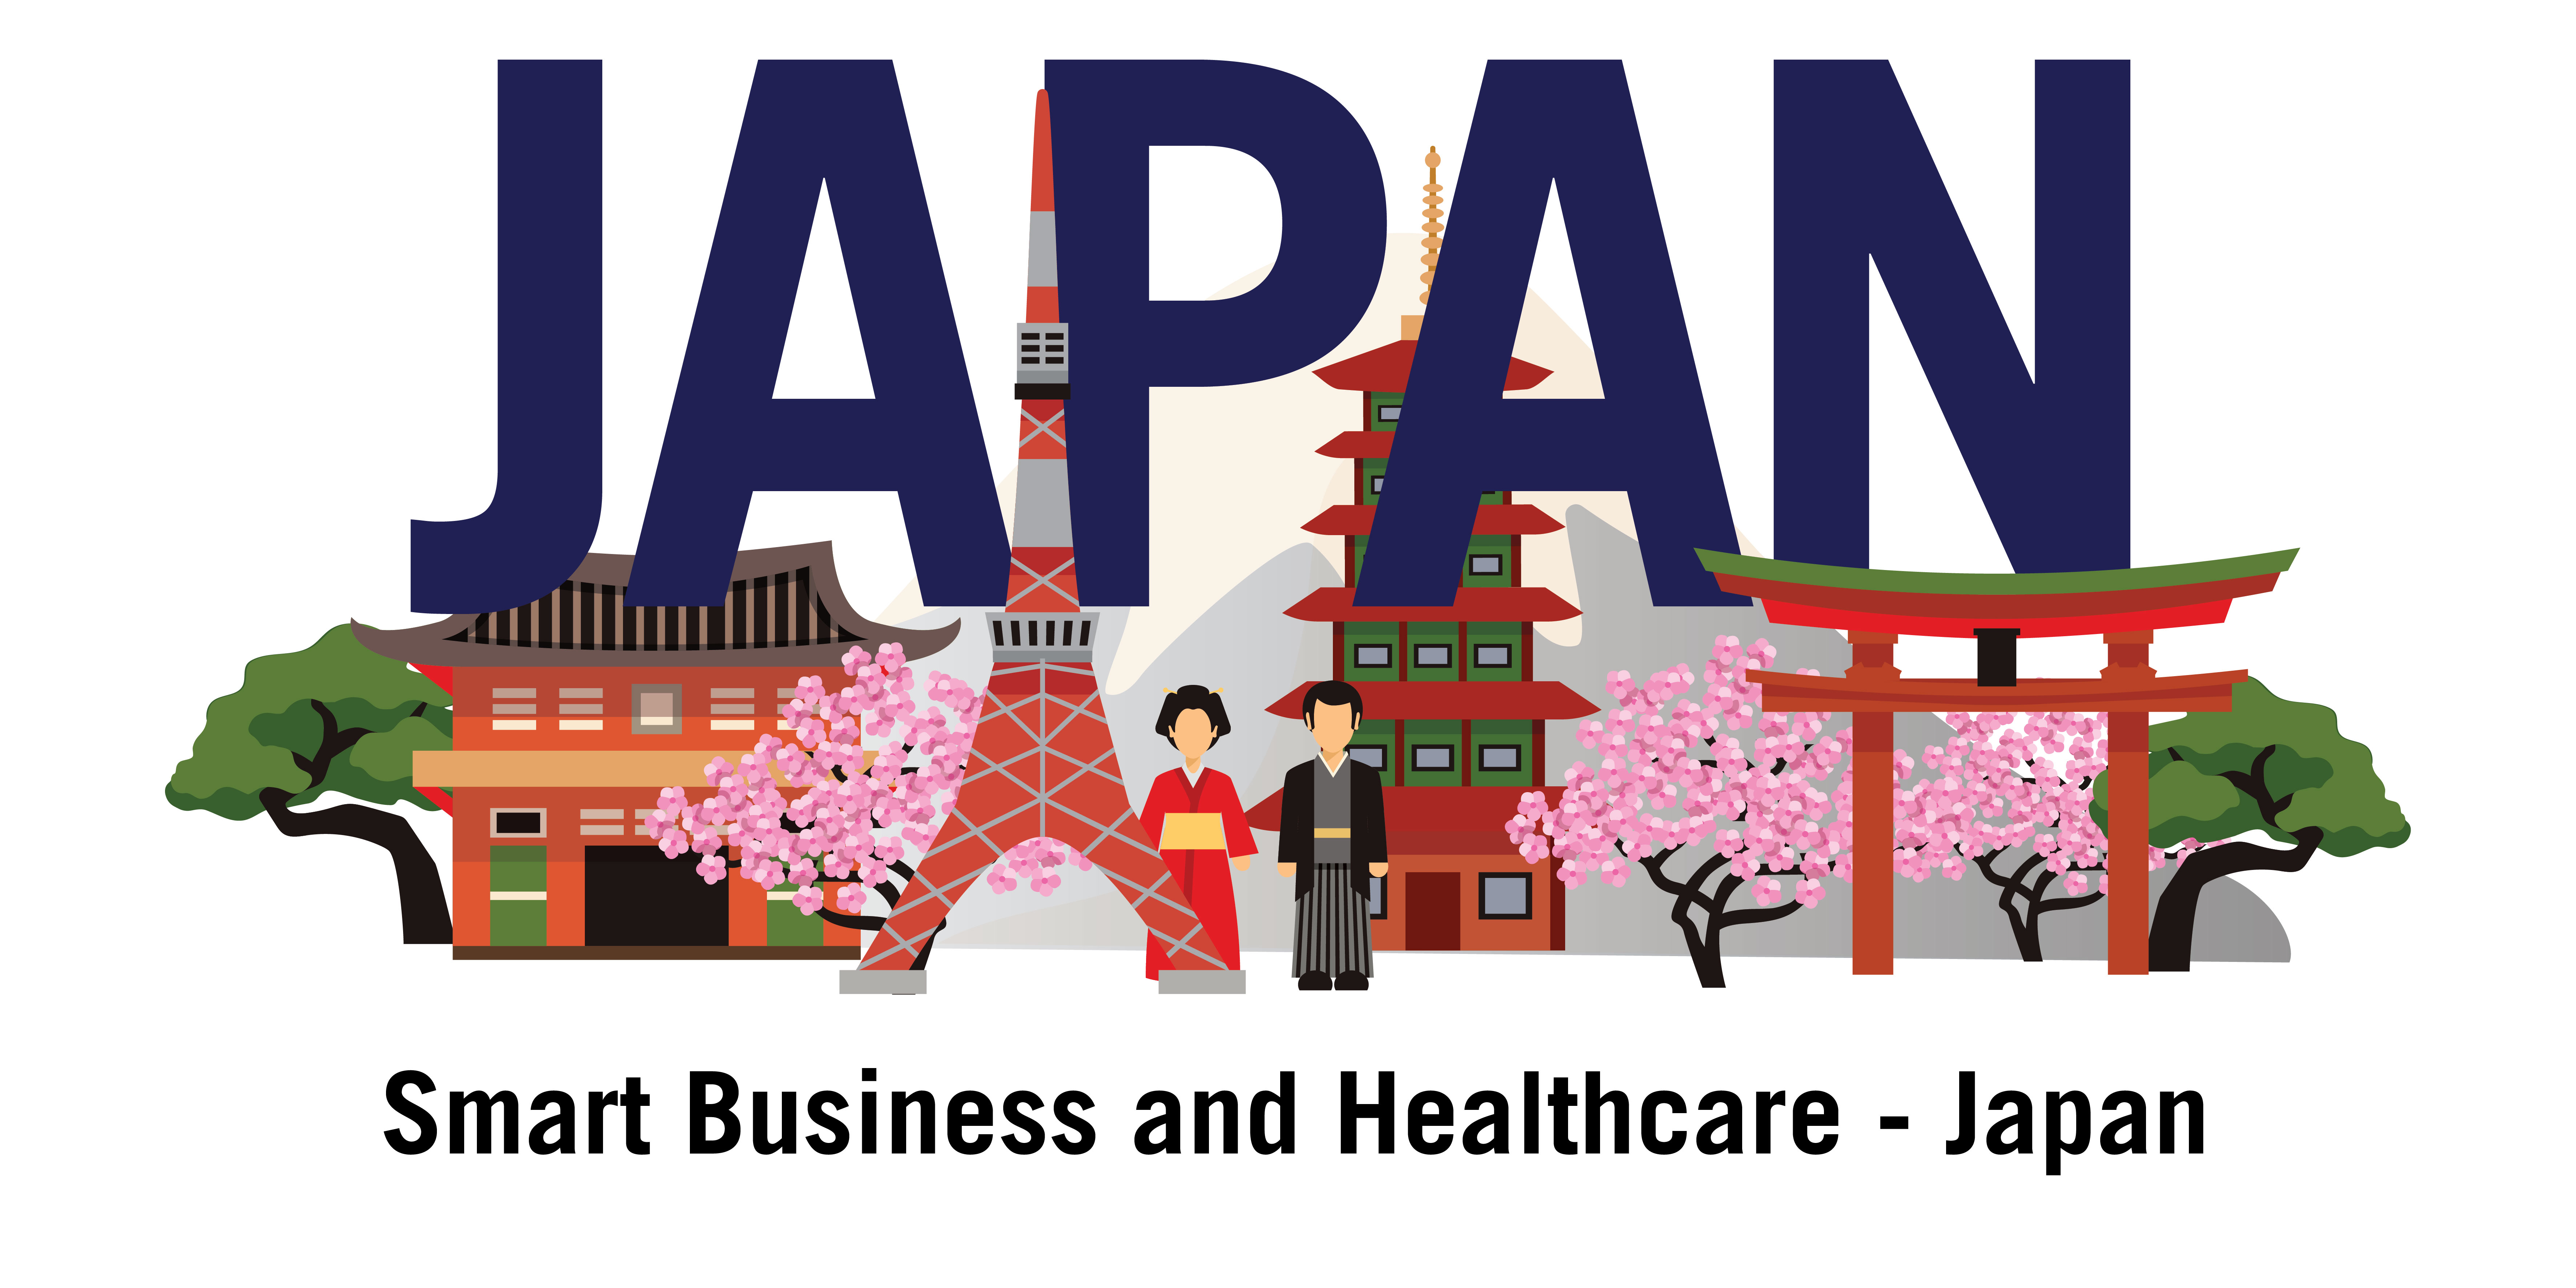 Smart Business and Healthcare - Japan